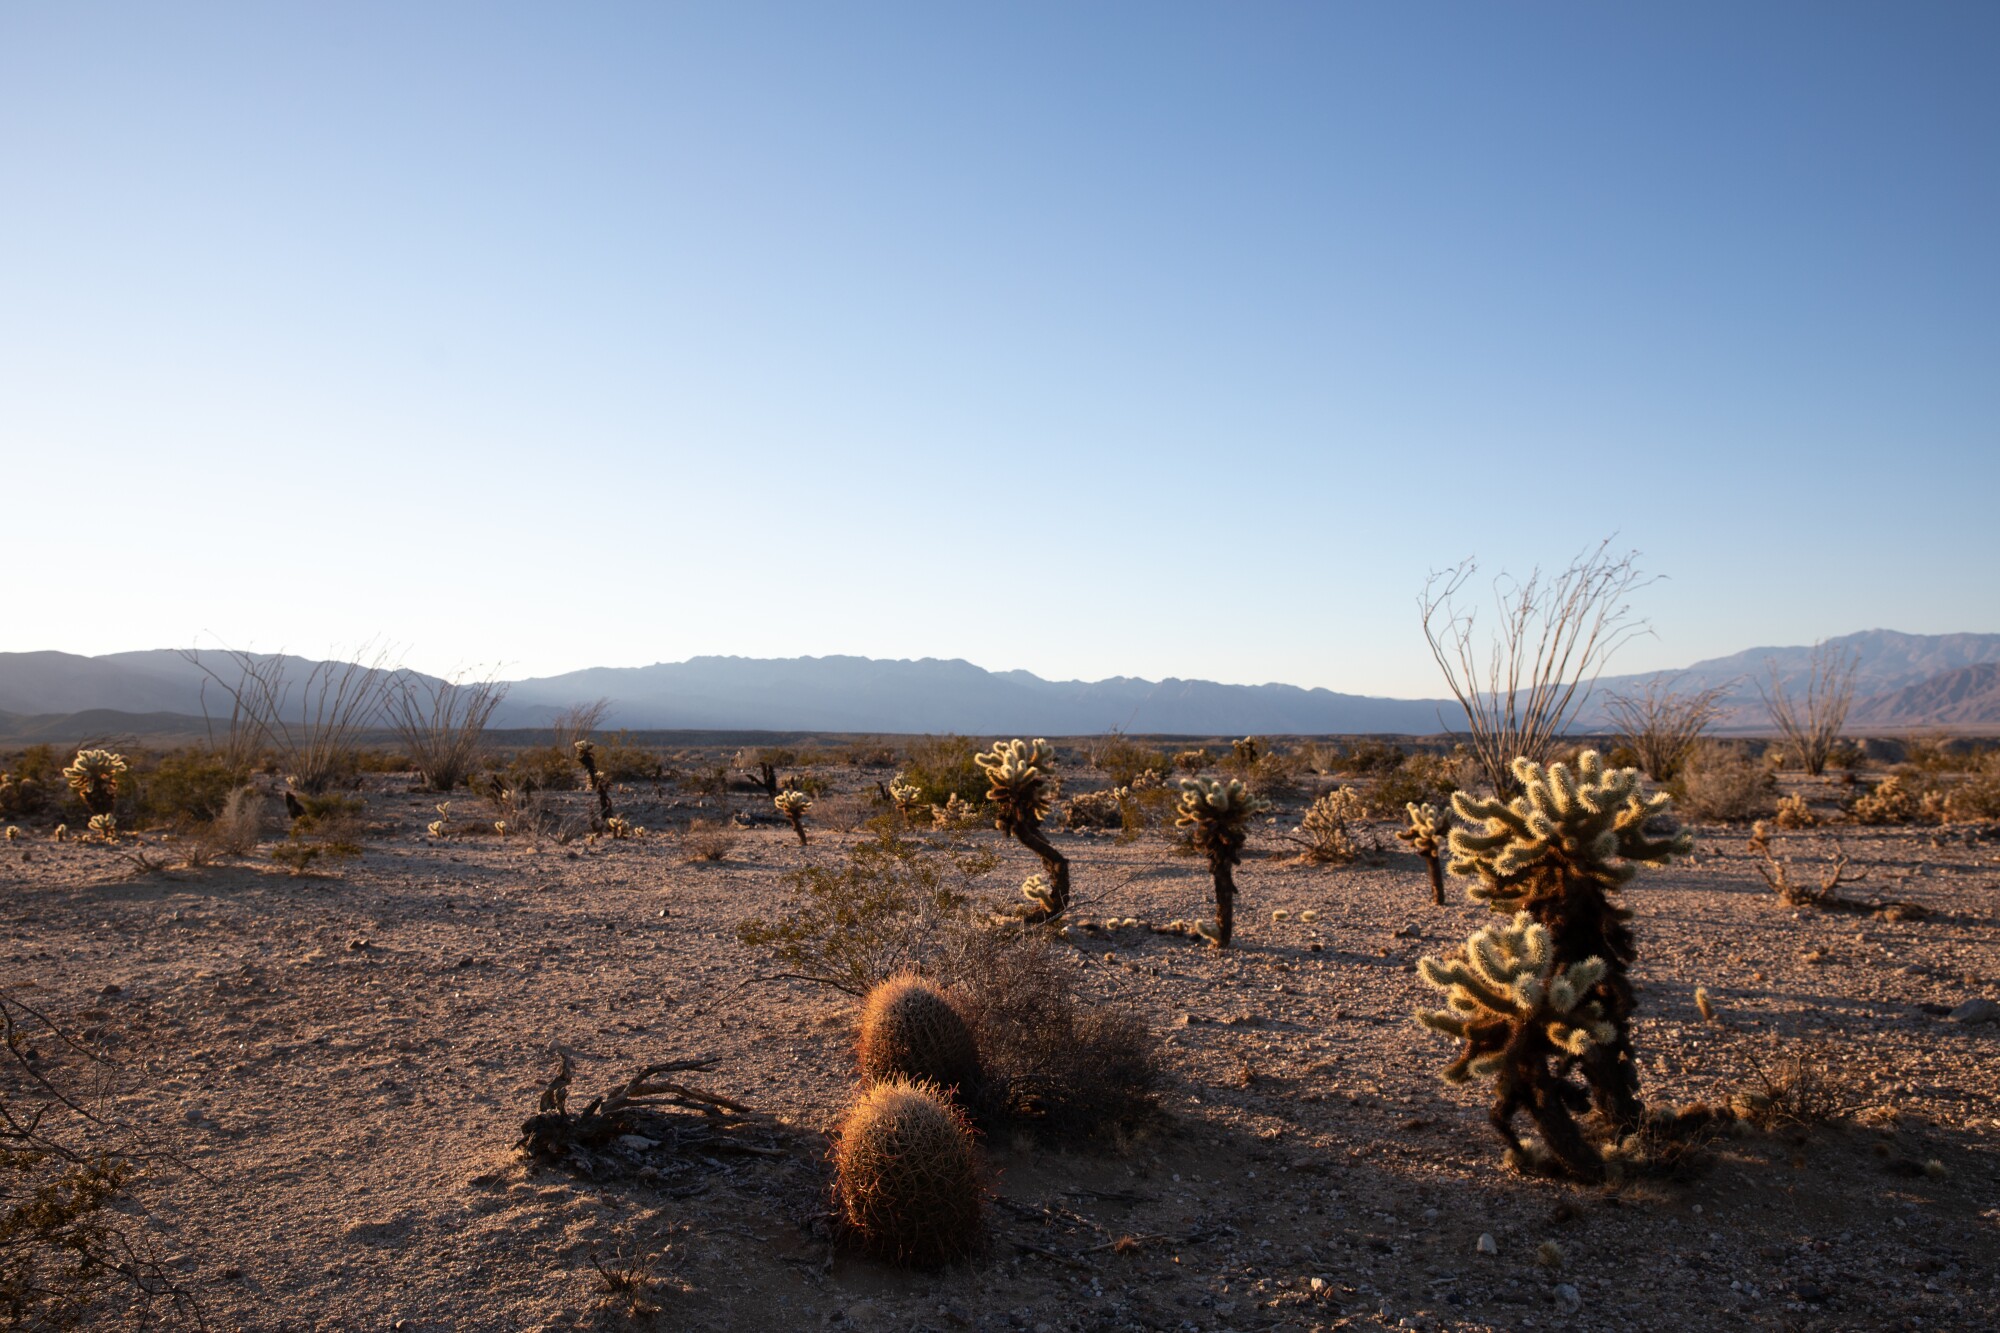 Ocotillo, cholla, creosote and other desert plants grow in Anza-Borrego Desert State Park.